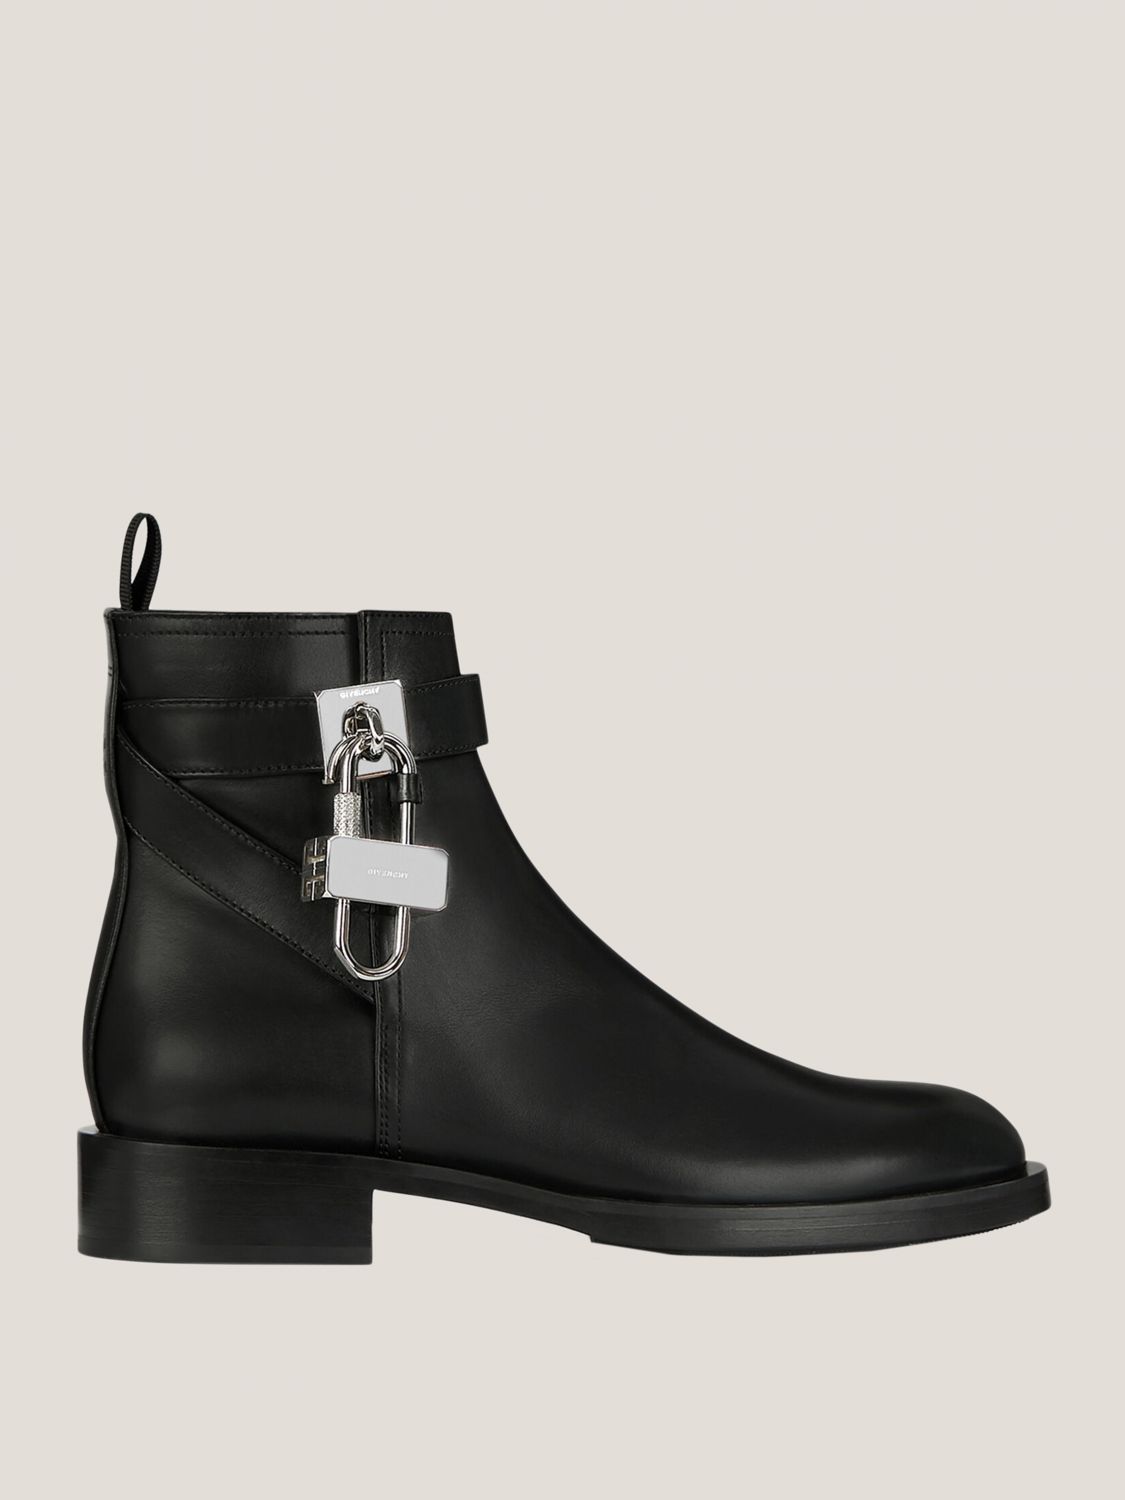 GIVENCHY: Boots women - Black | GIVENCHY flat ankle boots BE602PE0YP ...